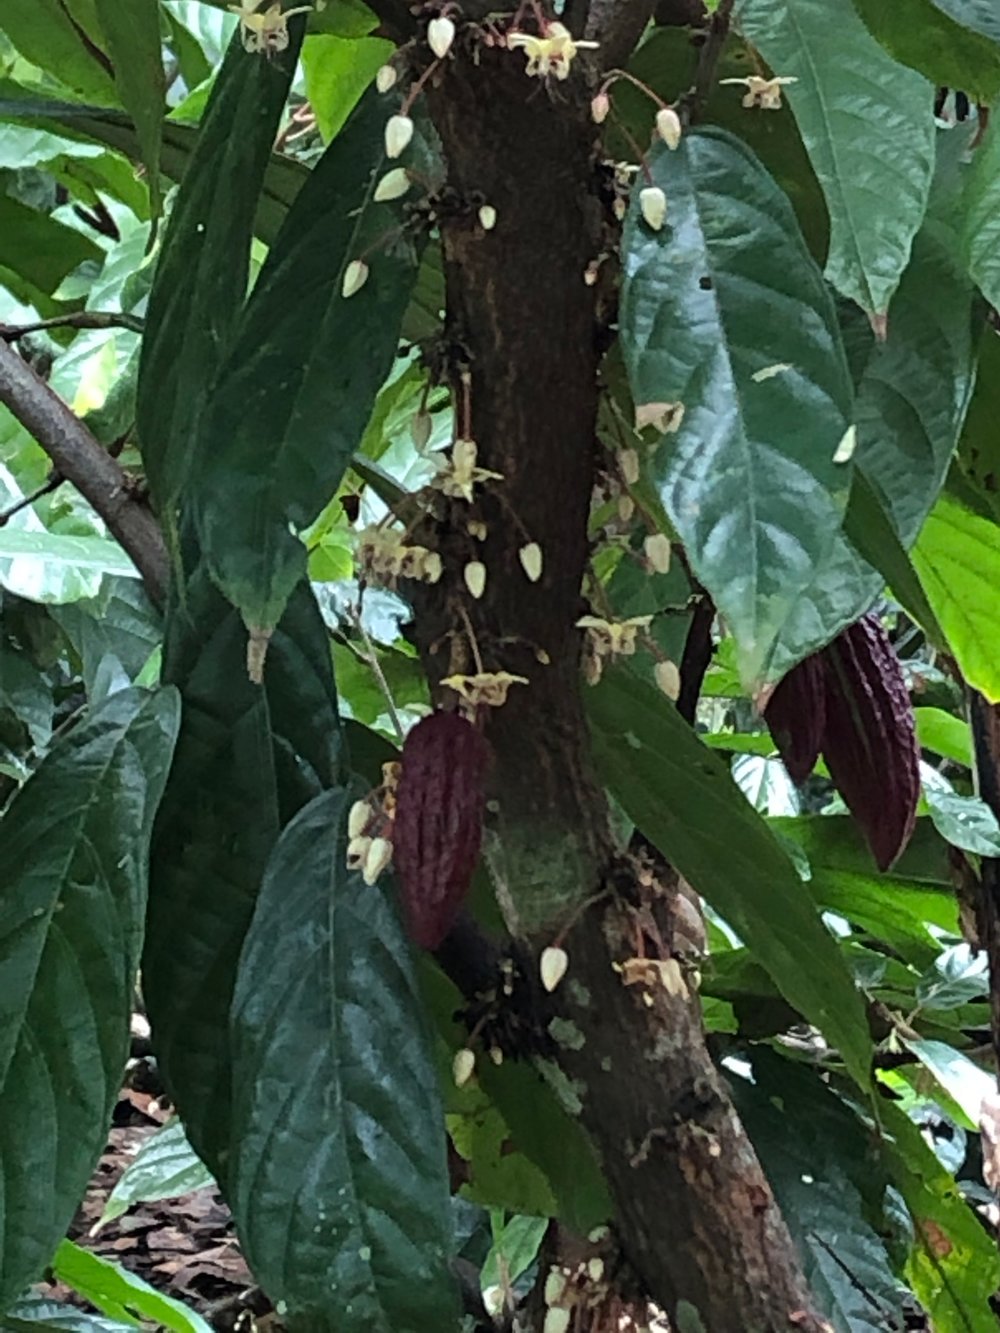  Cocoa tree flowers. They said that a species of mosquito is the pollinator. 